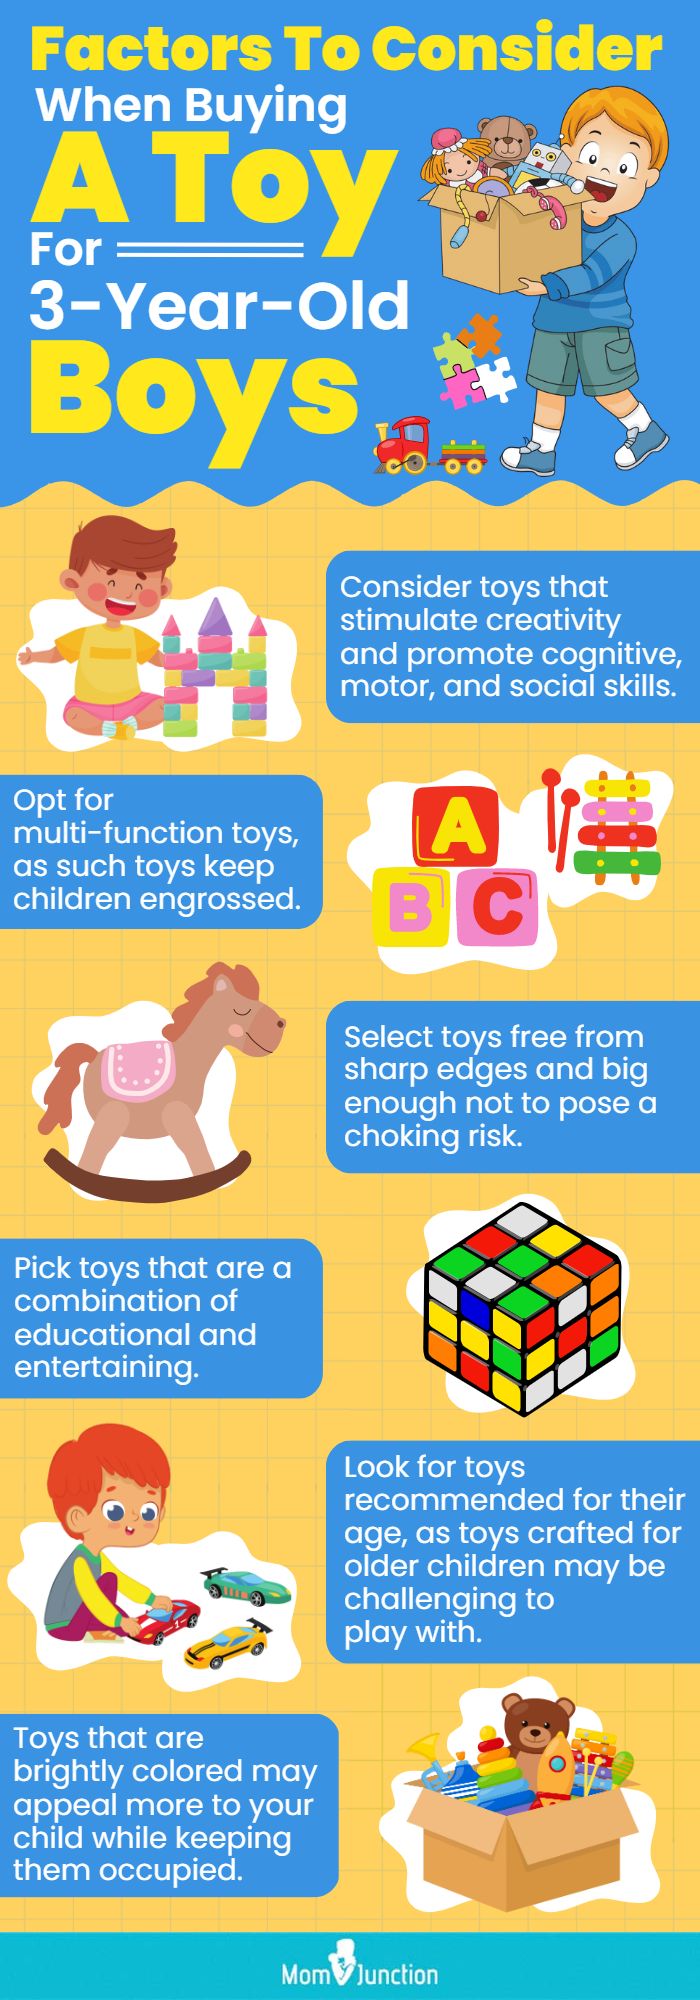 https://www.momjunction.com/wp-content/uploads/2019/12/Infographic-A-Buying-Guide-On-Selecting-The-Right-Toy-For-3-Year-Old-Boys.jpg